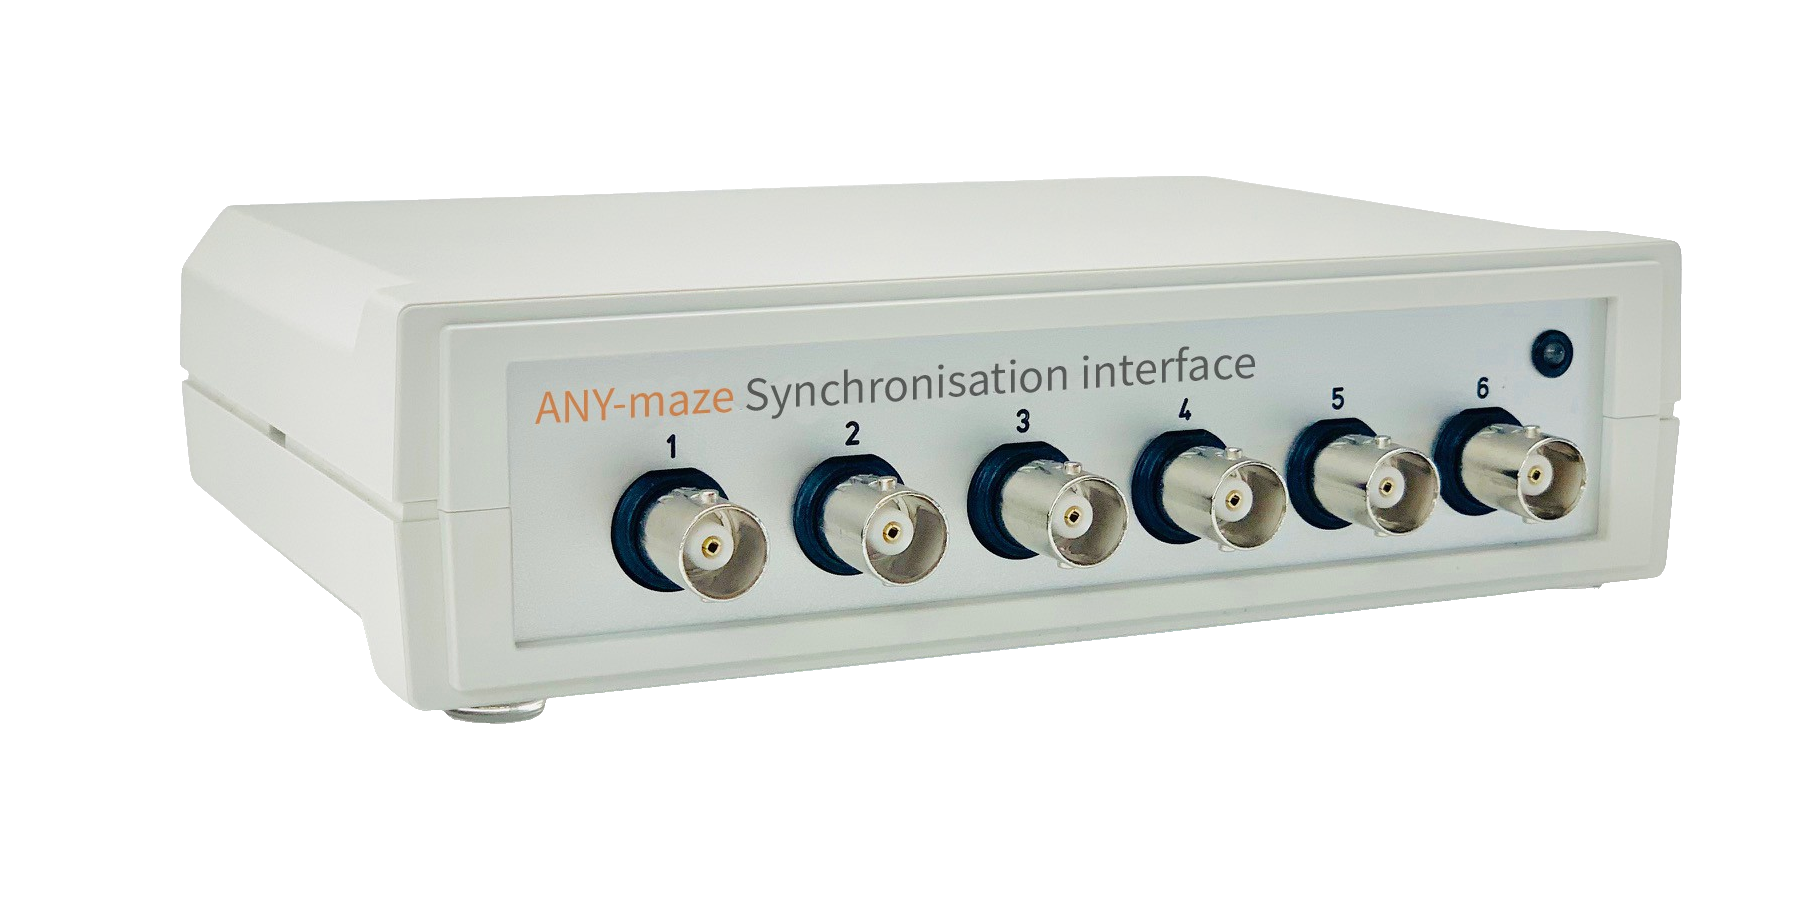 The ANY-maze Synchronisation interface picture